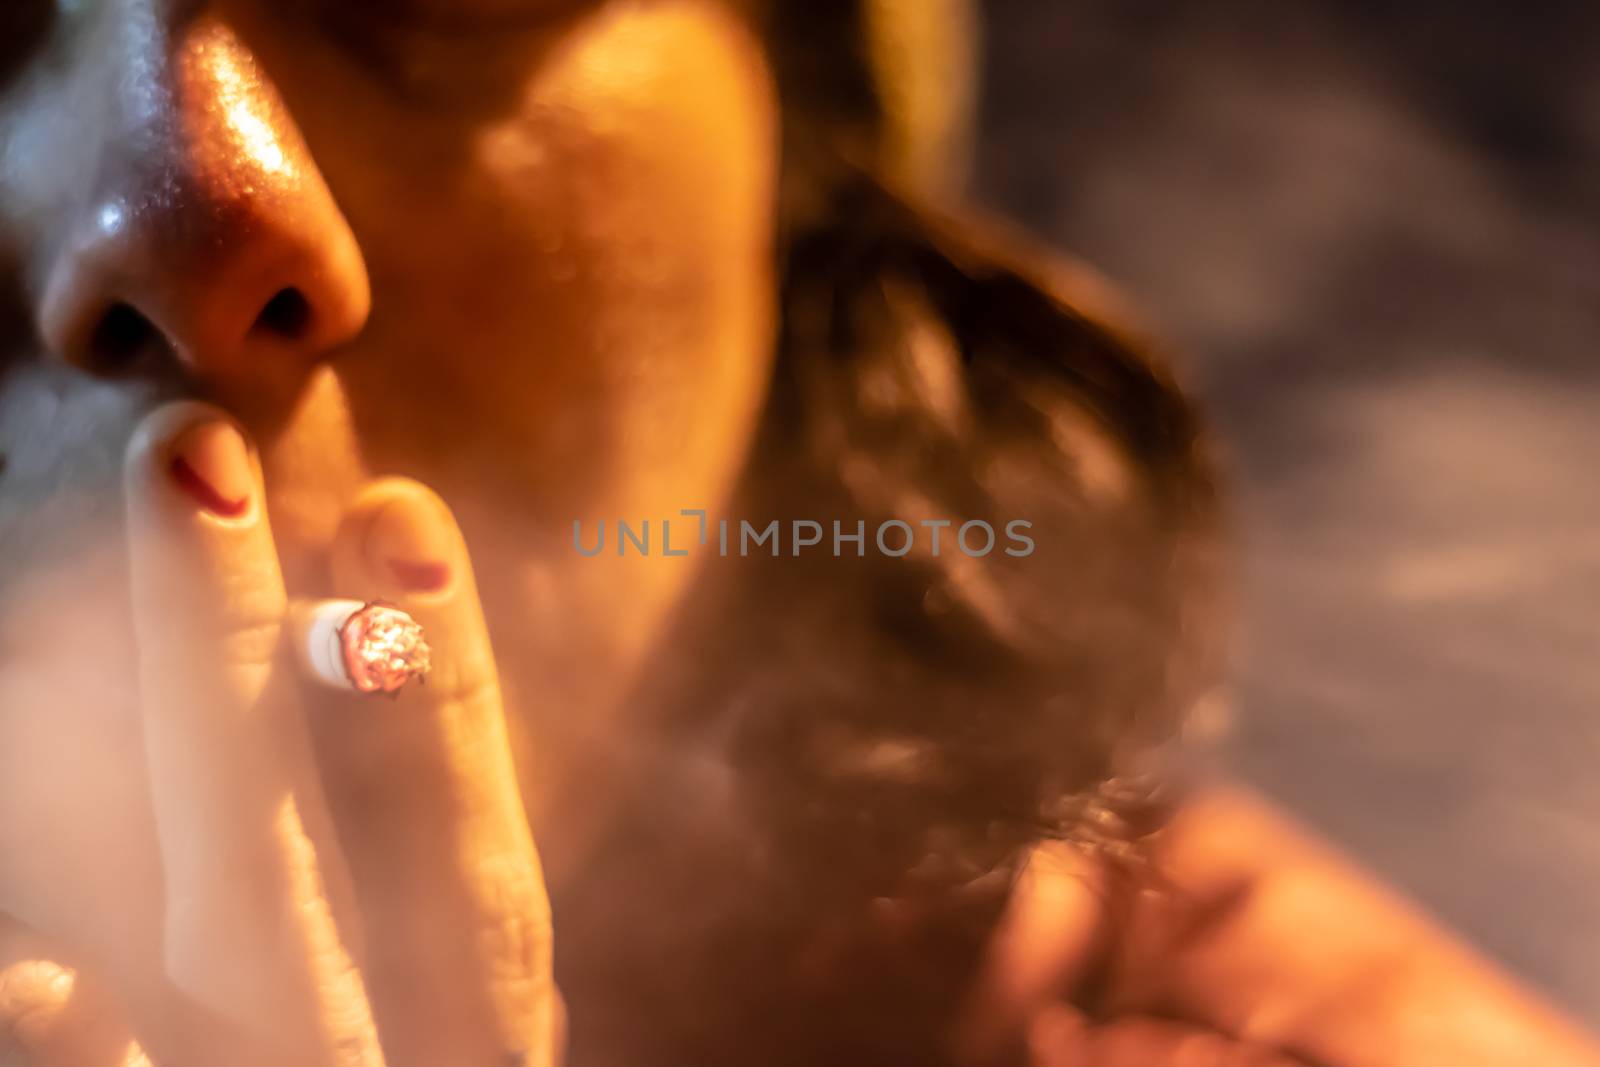 a girl smoking a cigarette with rubbed out red nail polish. background is blurry.